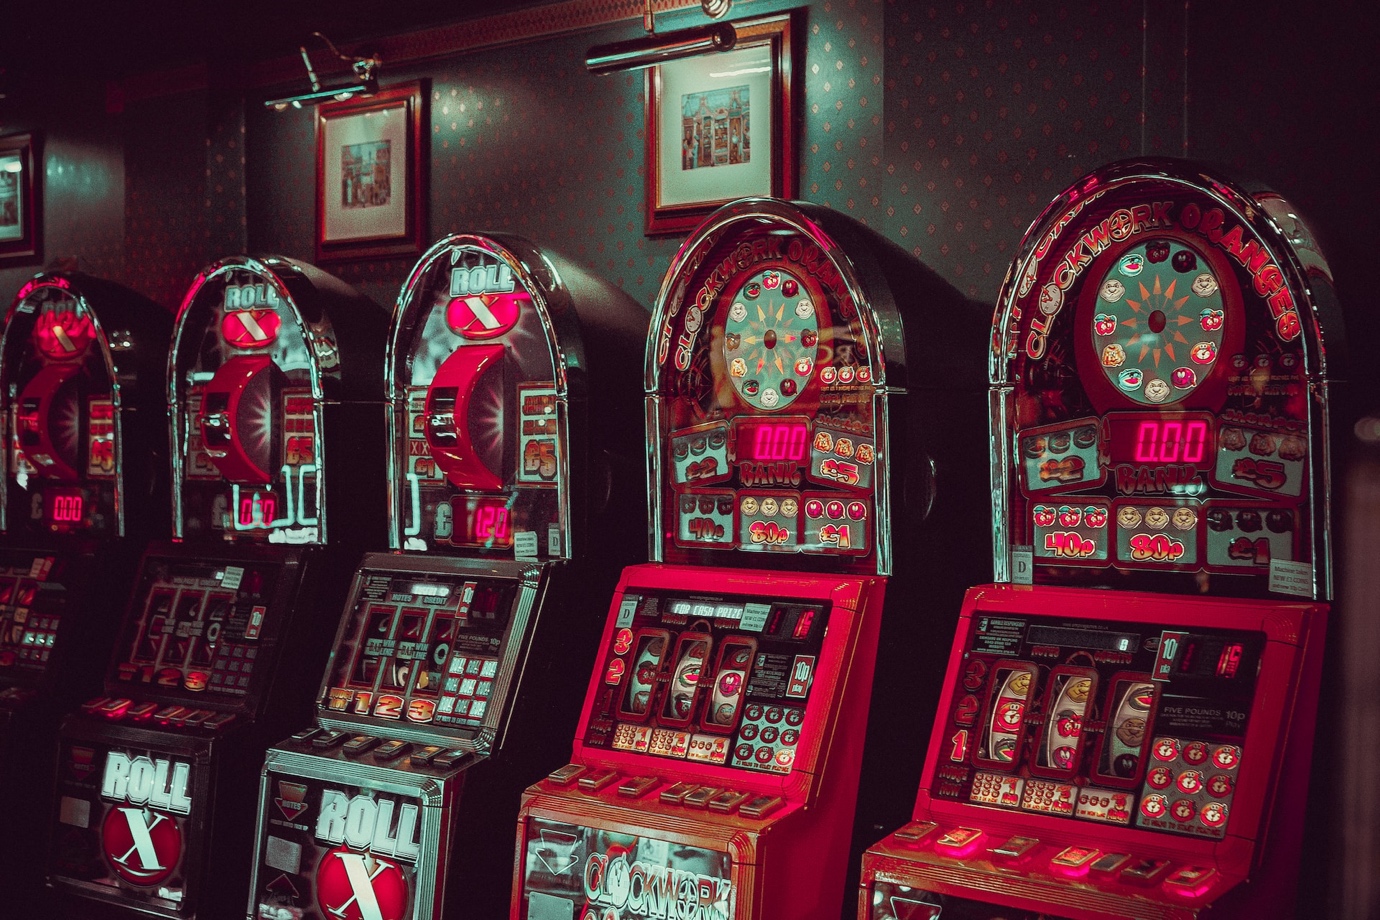 A row of slot machines

Description automatically generated